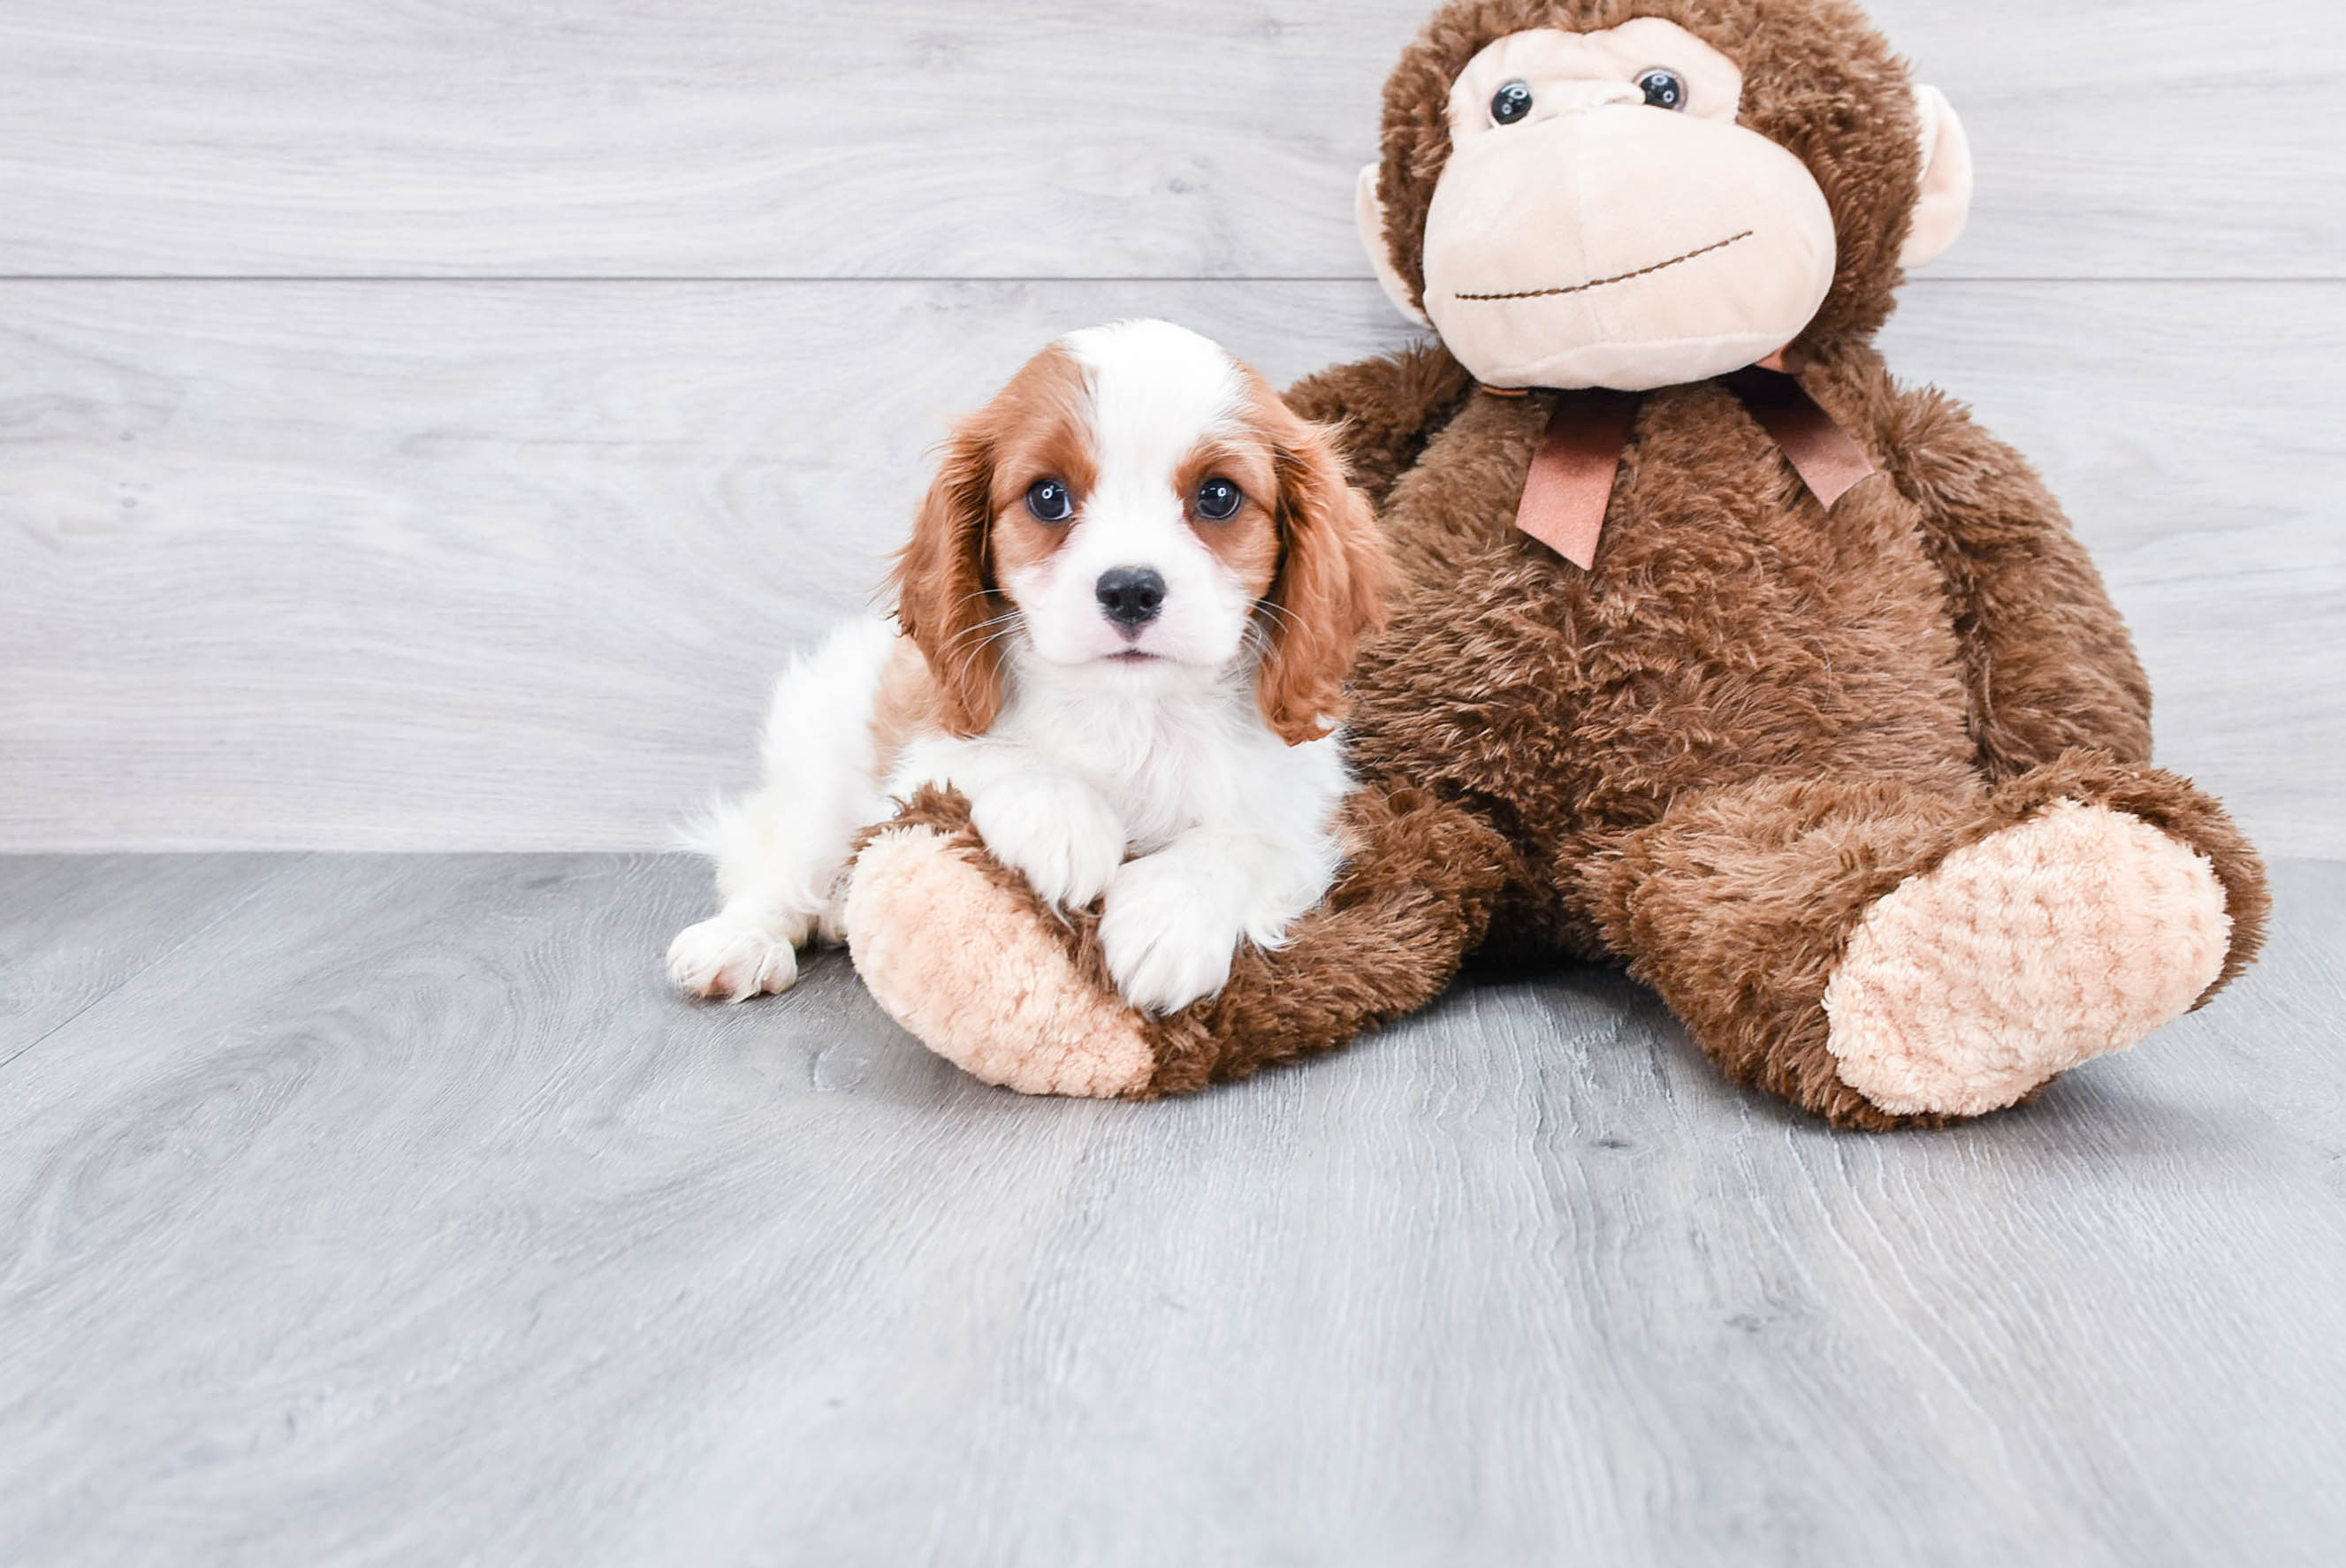 miniature king charles spaniel for sale